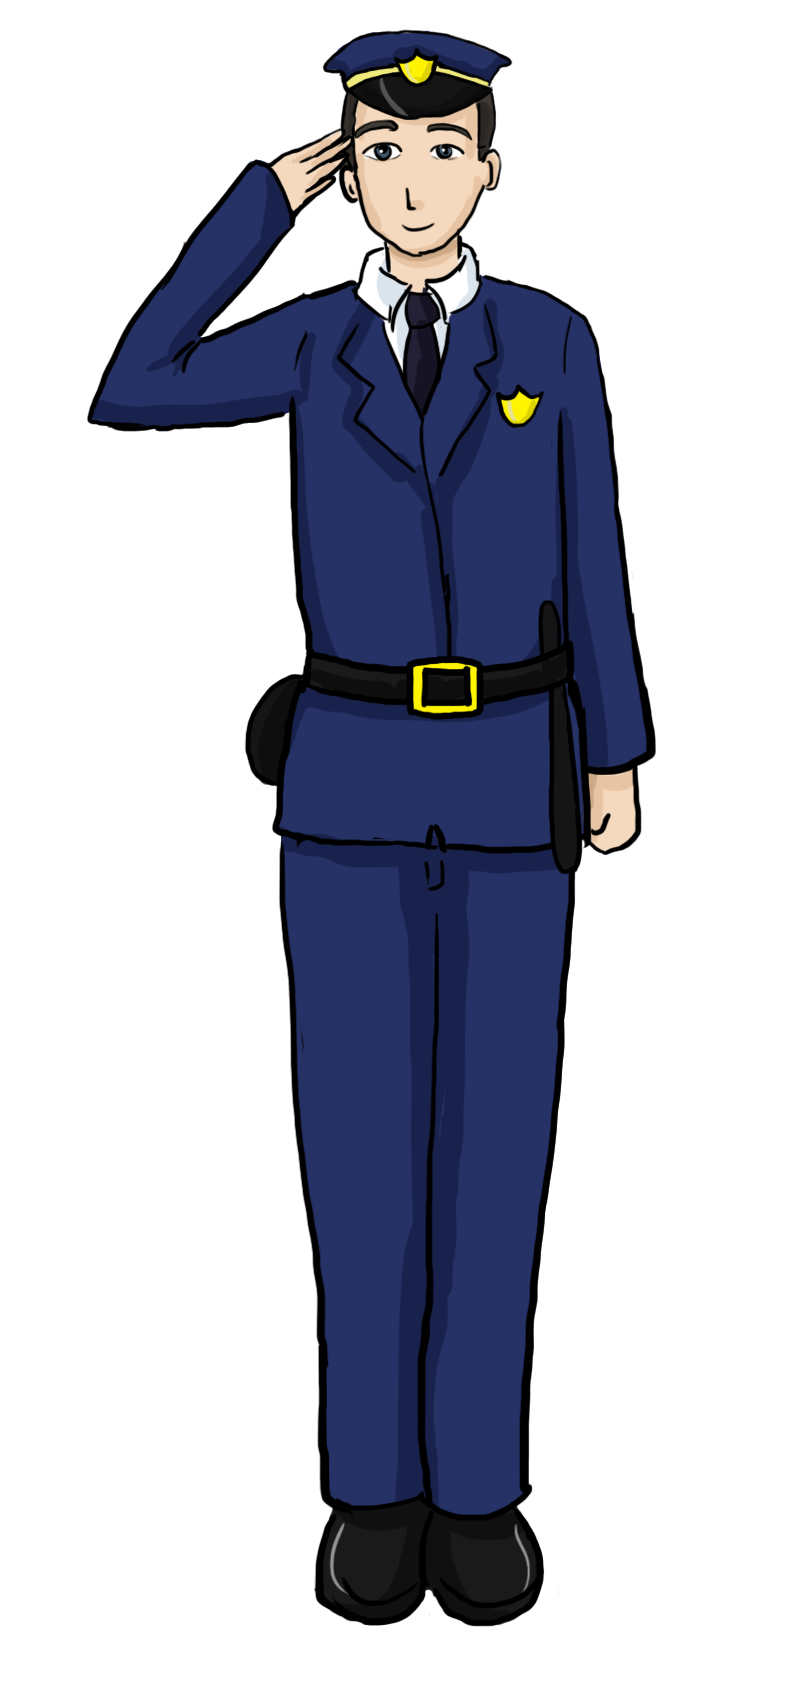 military officer clipart - photo #38